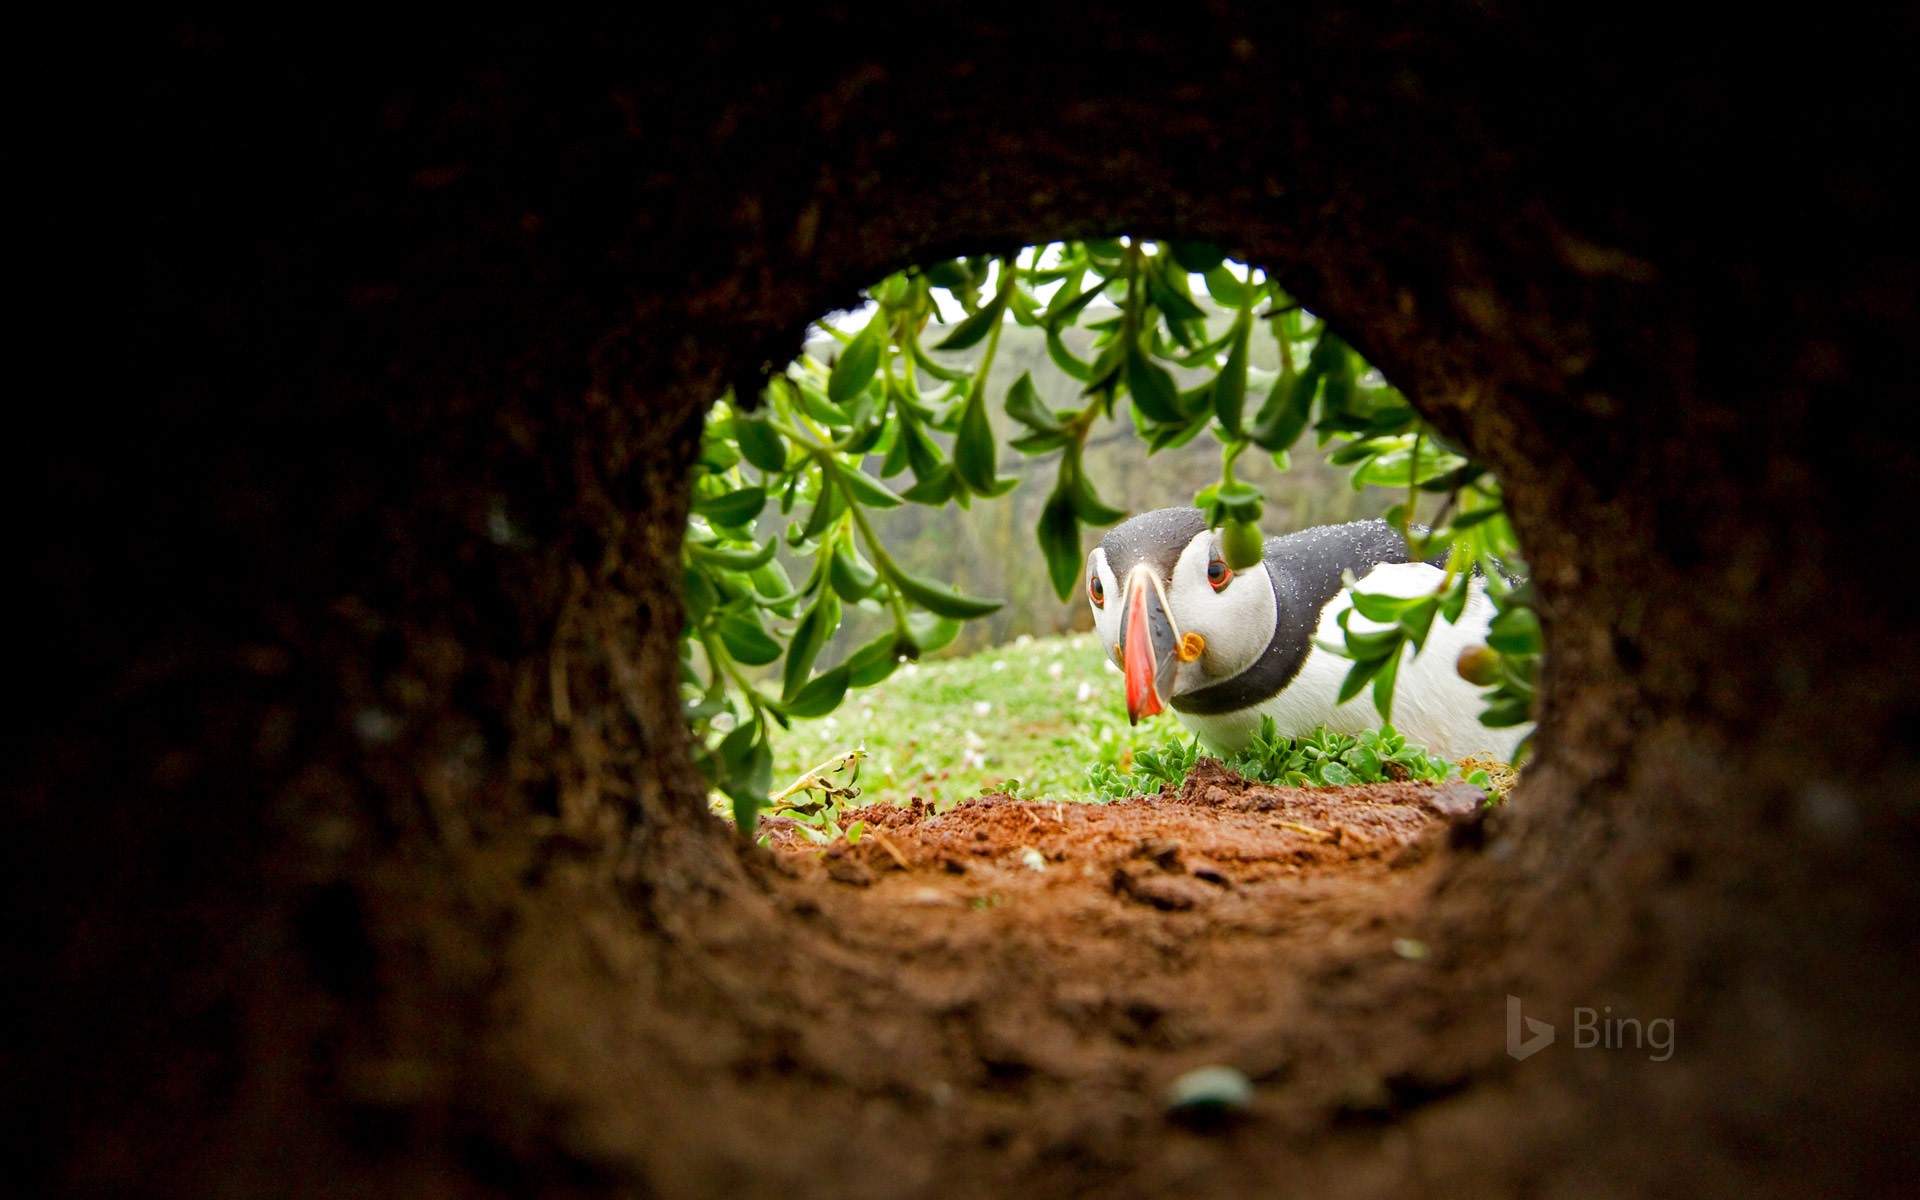 An Atlantic puffin inspects a nesting burrow on Skomer Island, Wales